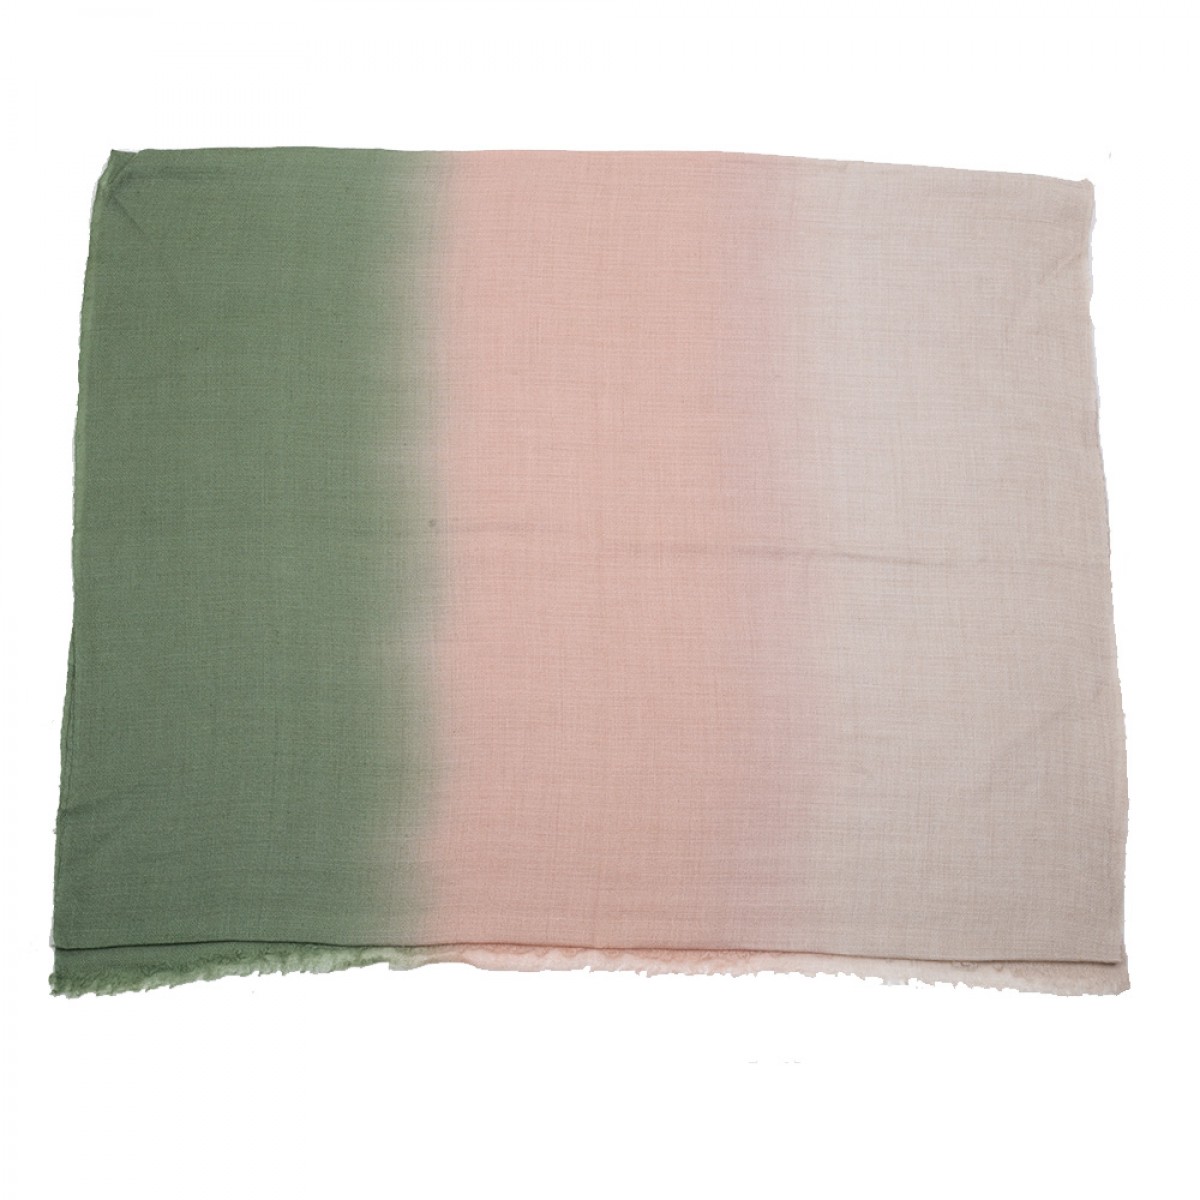 Ombre Pashmina Shawl - Moss Green & Baby Pink